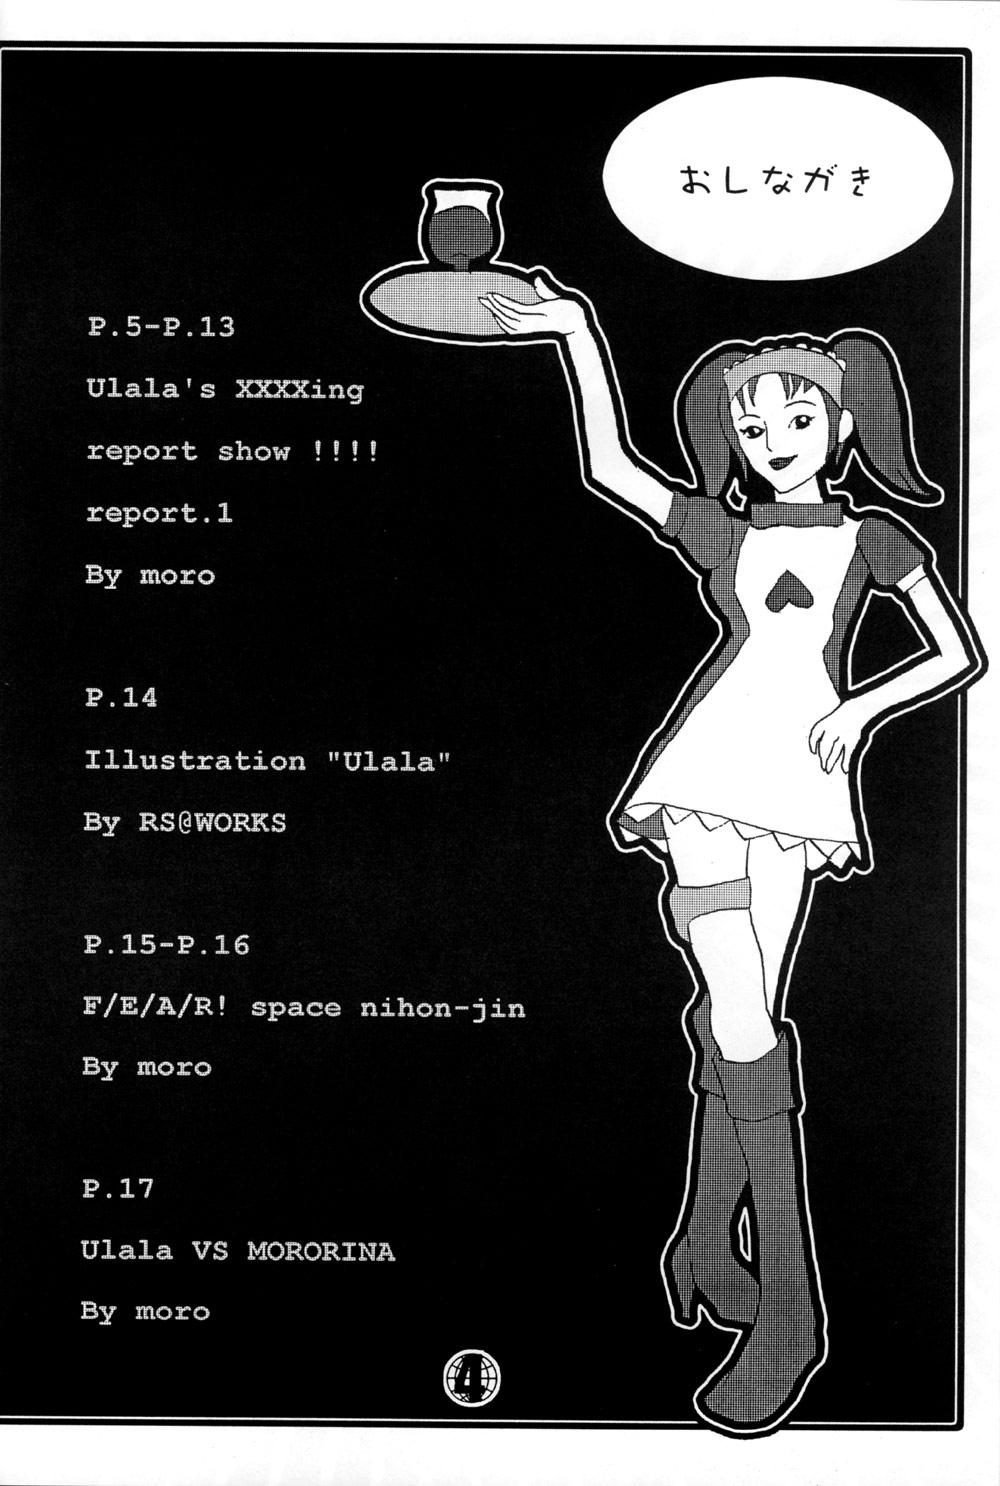 Cream Pie Ulala's XXXXing Report Show!!!! - Space channel 5 Rubdown - Page 4